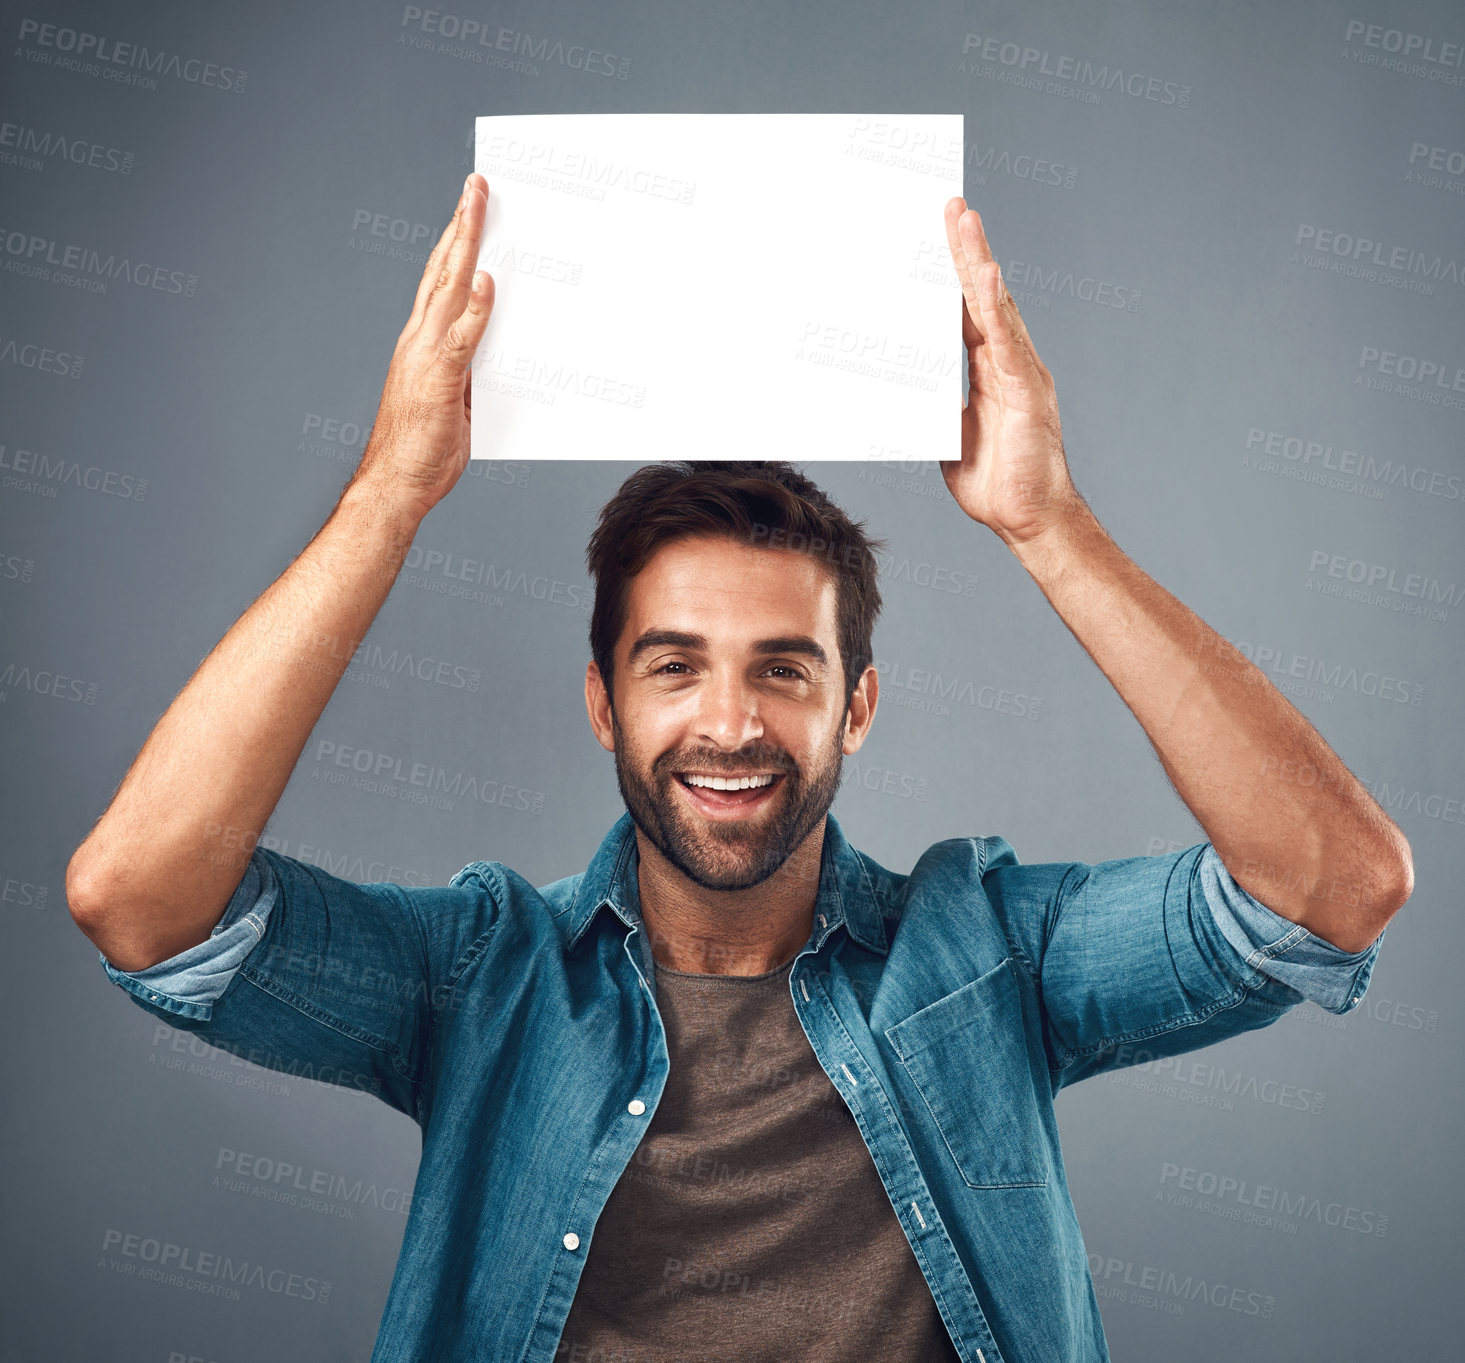 Buy stock photo Happy man, portrait and poster on mockup for advertising, marketing or branding against a grey studio background. Male person holding rectangle billboard or placard for sign, message or advertisement